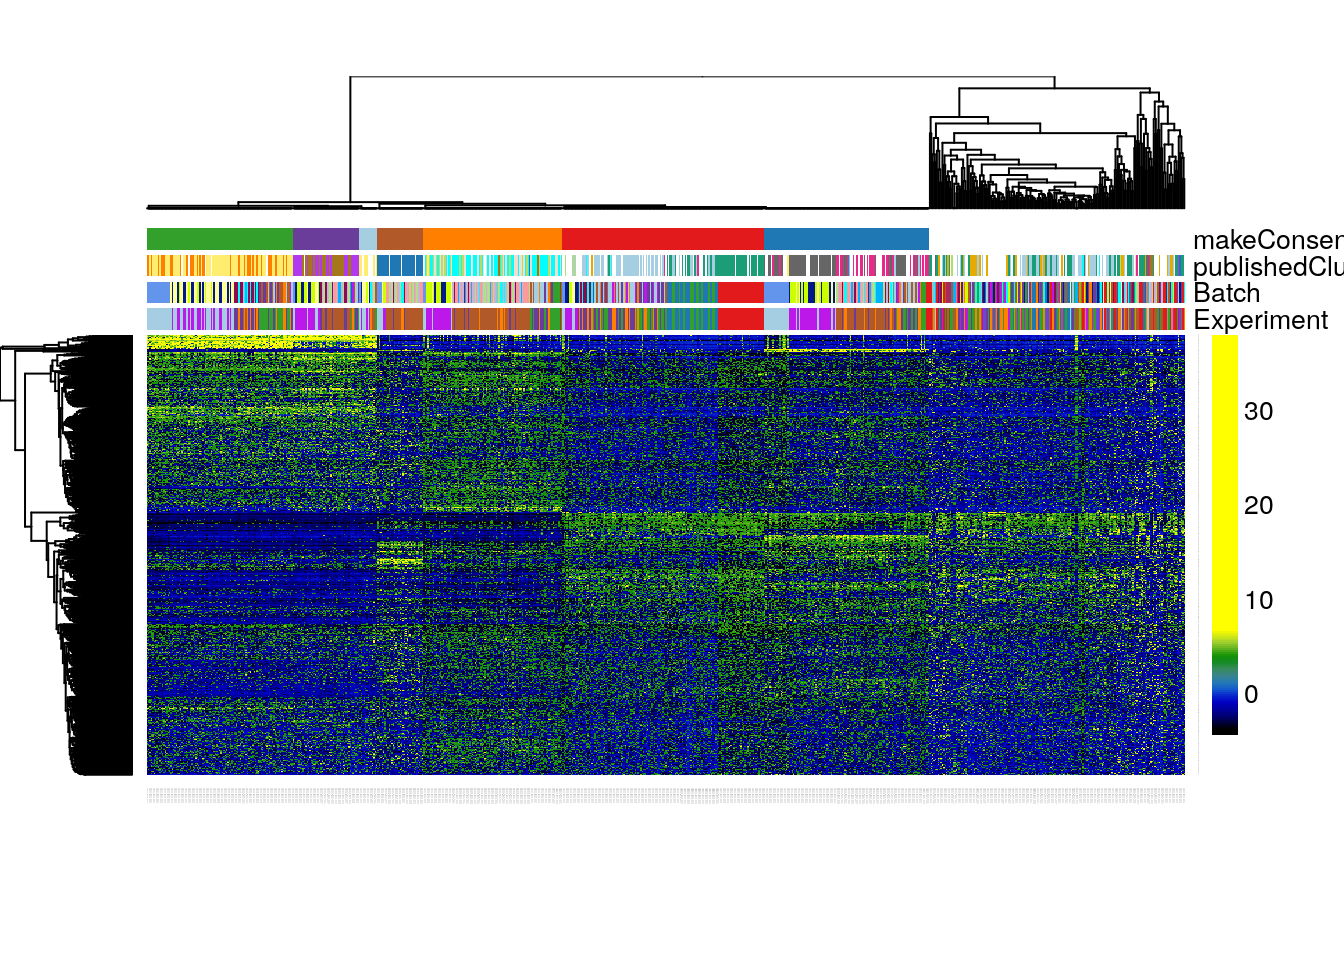 RSEC: Heatmap of the normalized expression measures for the 1,000 most variable genes, where rows correspond to genes and columns to cells ordered by RSEC clusters.